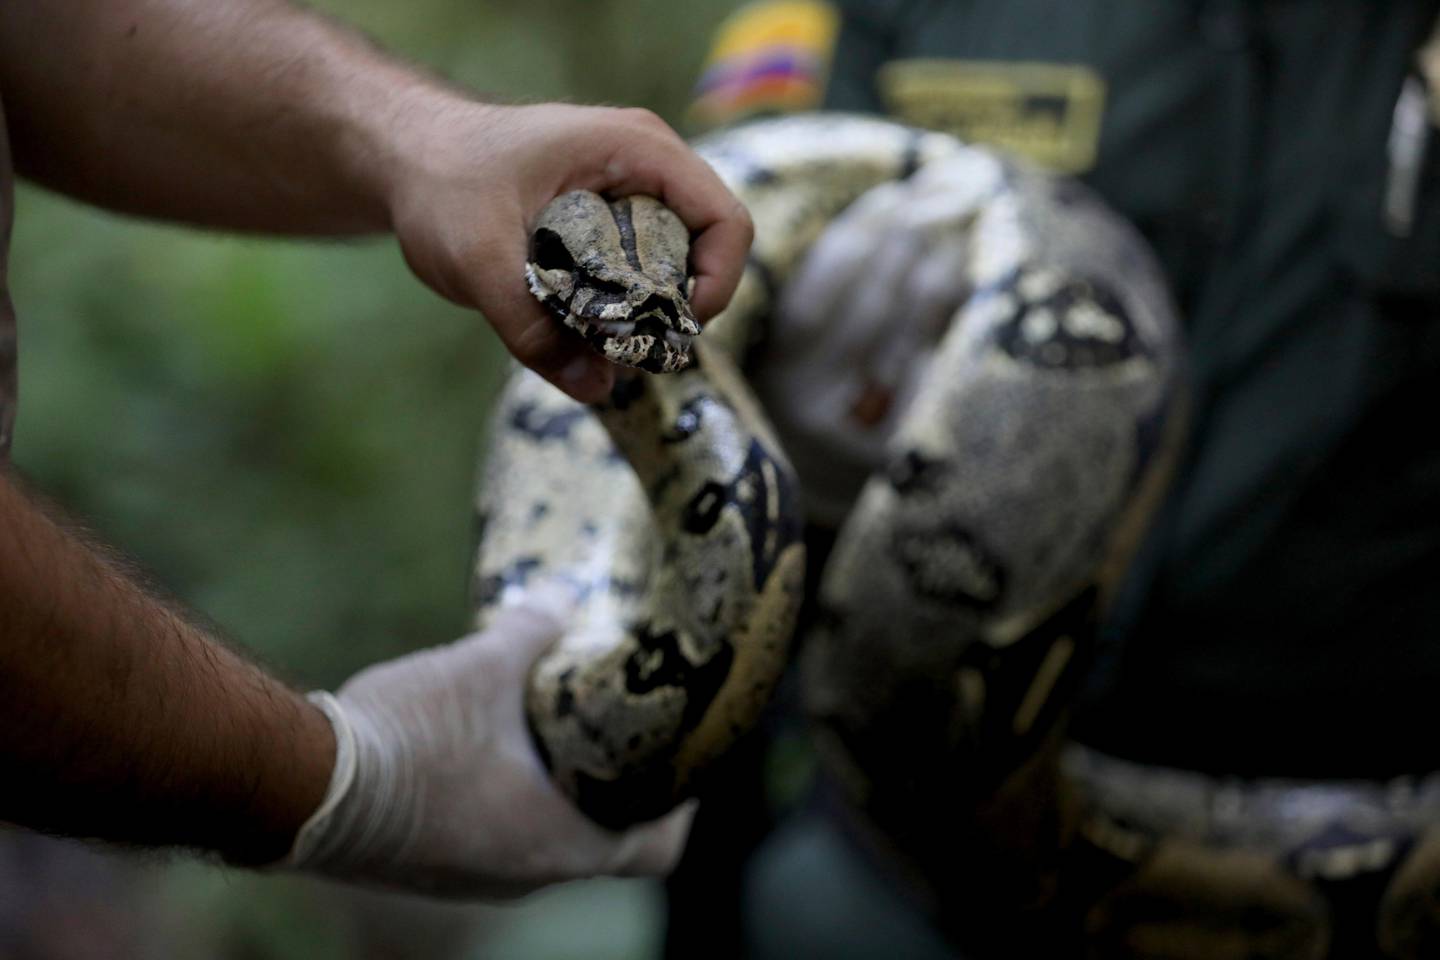 A boa constrictor is prepared to be released by environmental authorities, at a natural reserve in Leticia, on the Colombian Amazon, Thursday, Sept. 5, 2019. The boa had been found inside a house in Leticia two days ago, before the authorities captured it and then released it. (AP Photo/Fernando Vergara)